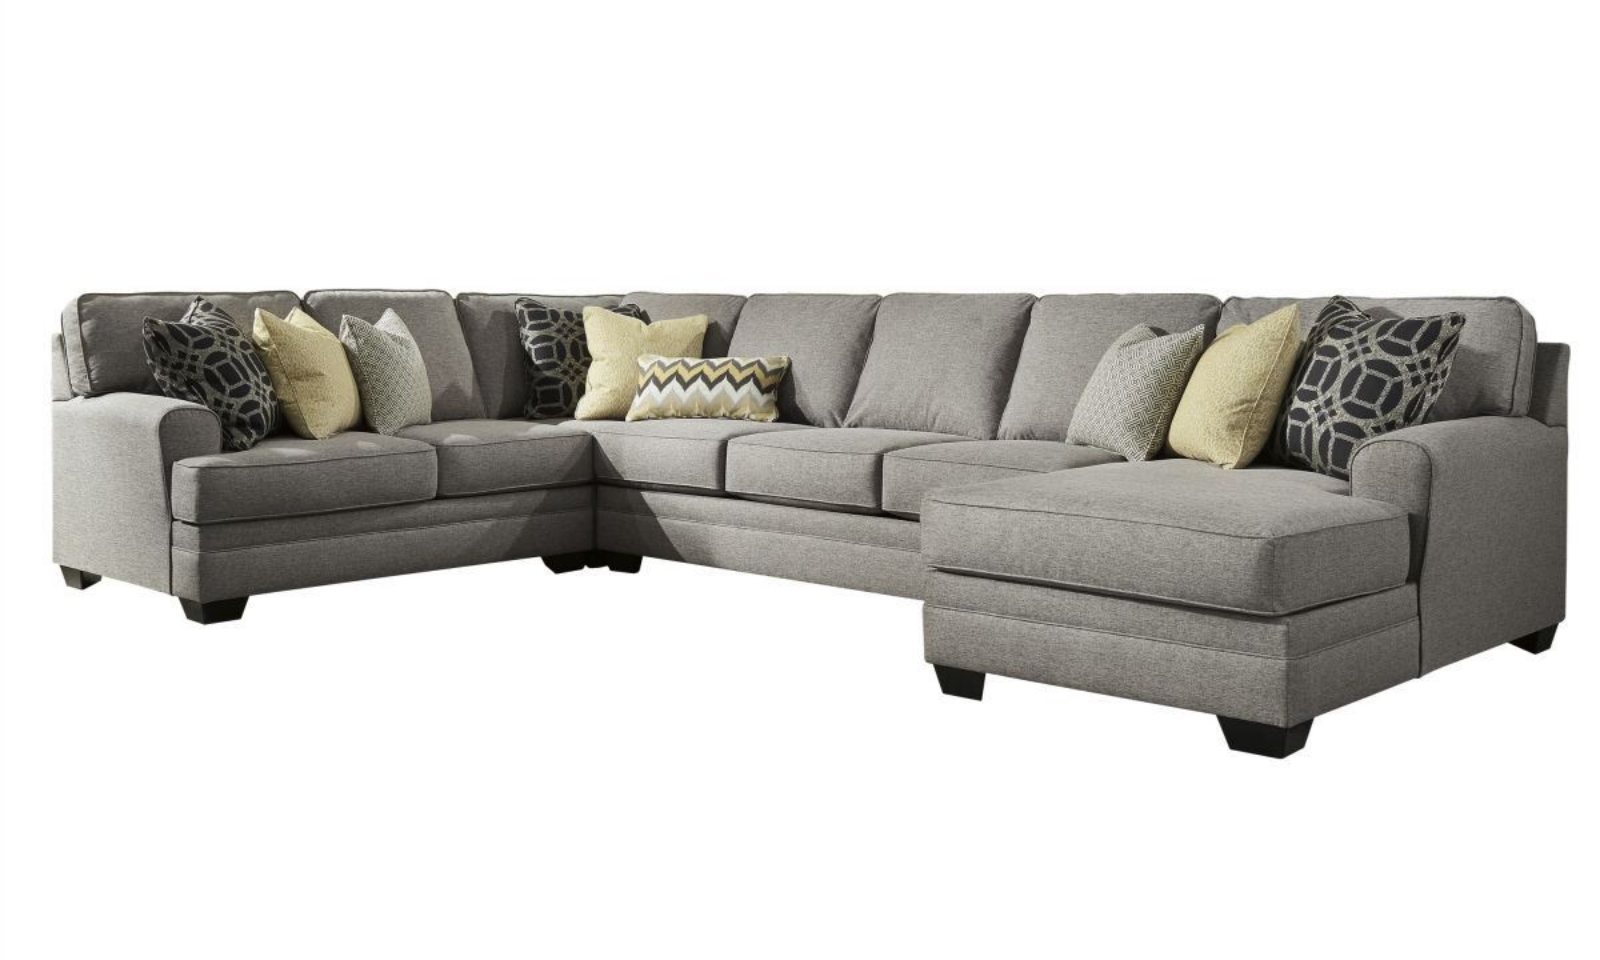 Picture of Cresson Sectional